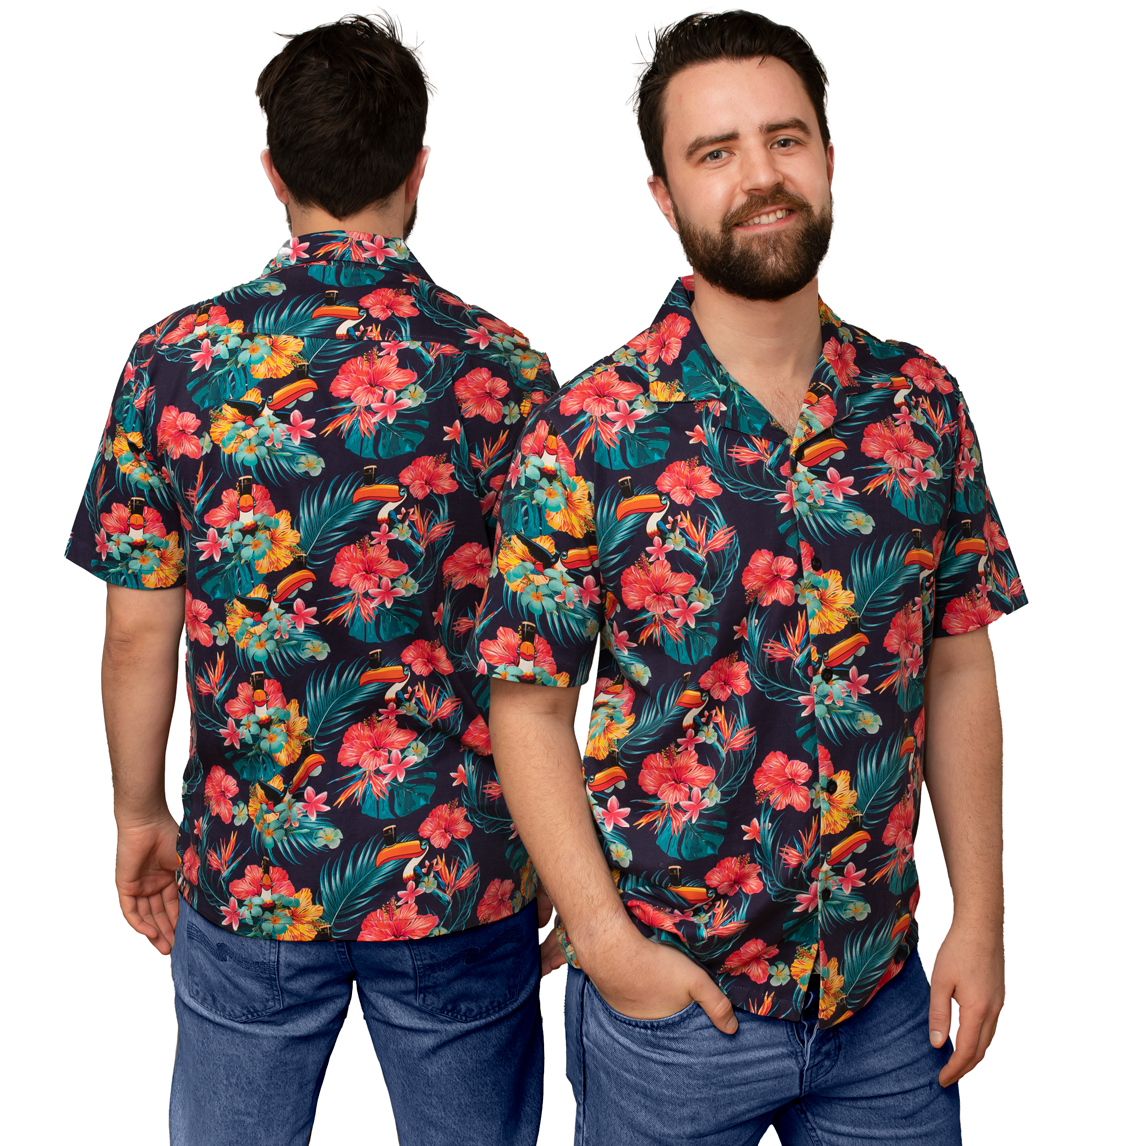 A man wearing a Guinness UK Guinness Toucan Hawaiian Shirt adorned with tropical plants and flowers.